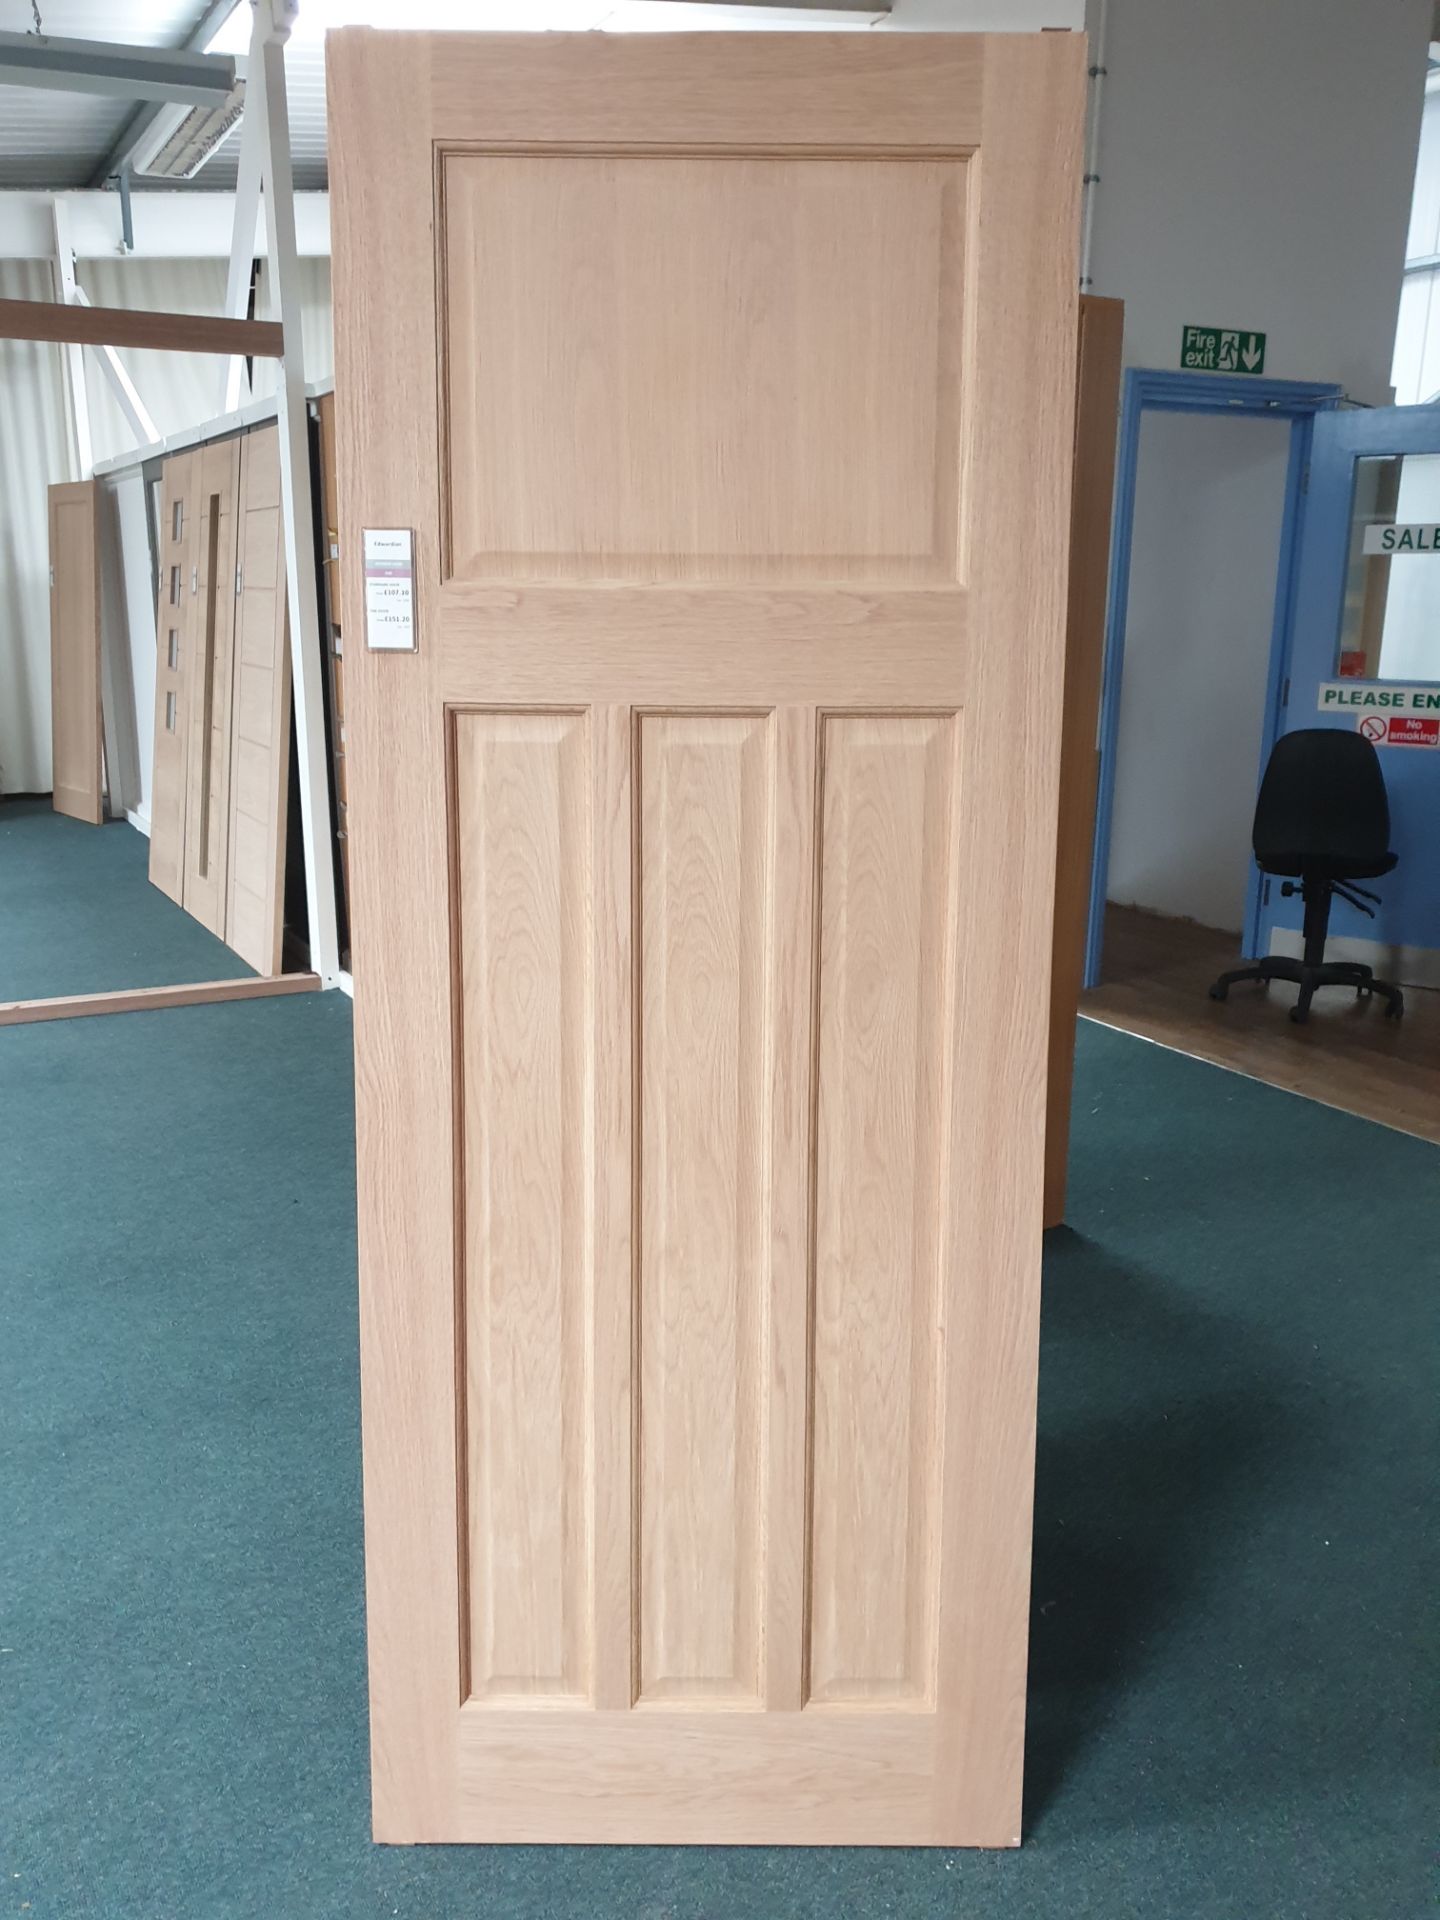 11 x Edwardian 4 Panel JAWOEDW27 1981x686x35mm Internal Door - Lots to be handed out in order they